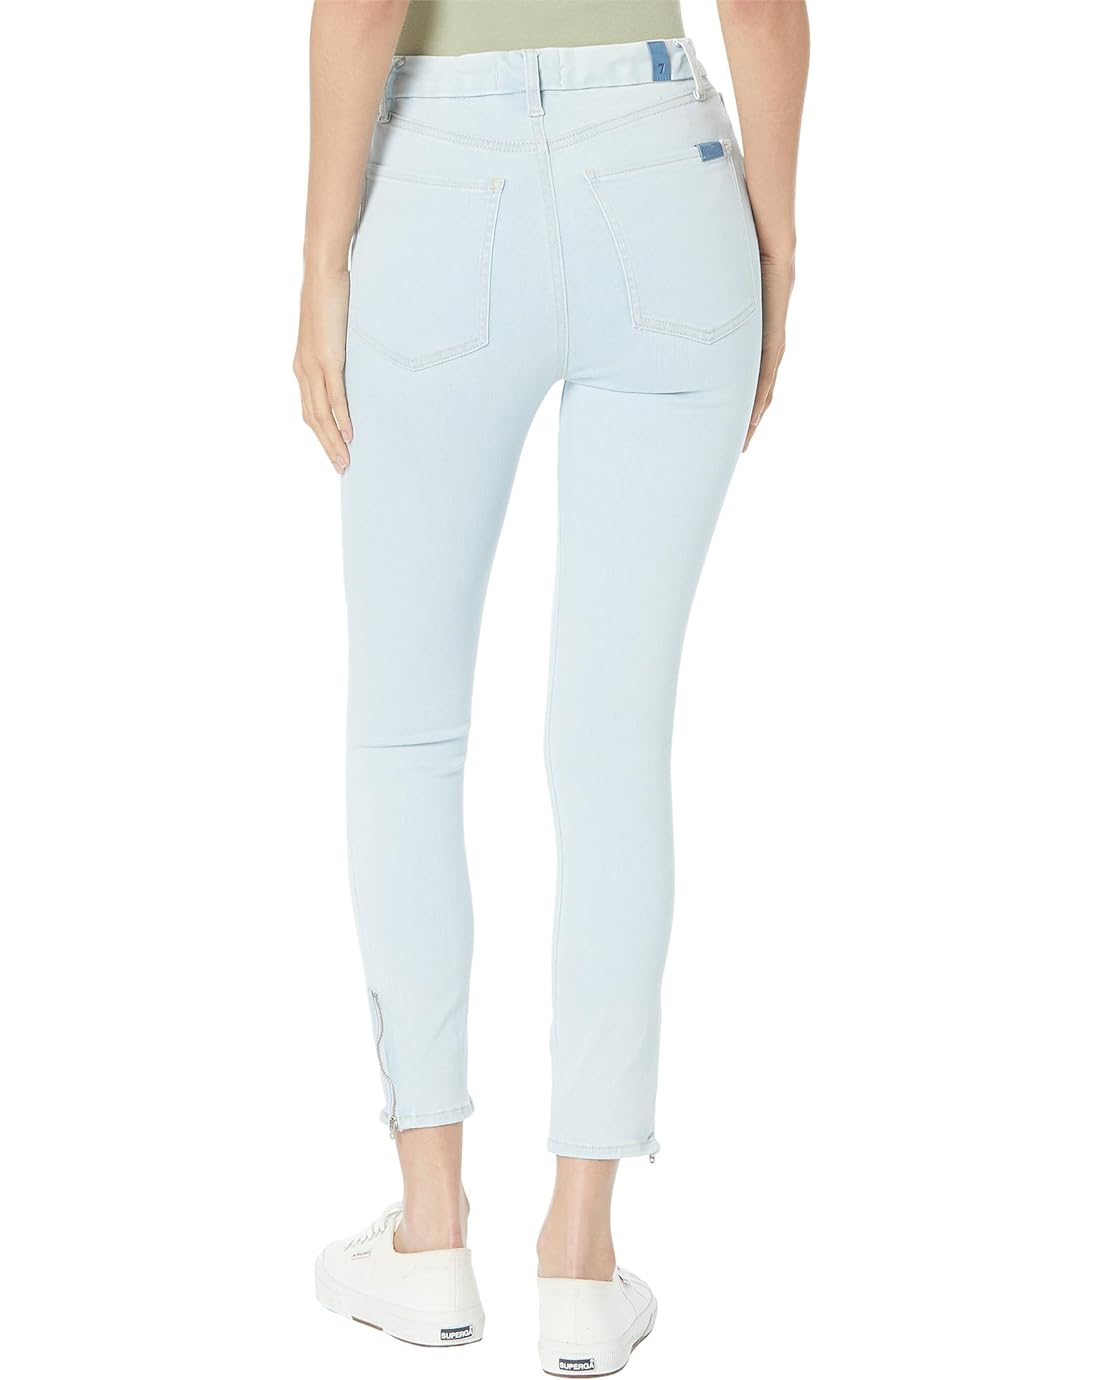  7 For All Mankind Ultra High-Rise Skinny Ankle in No Filter Peretti